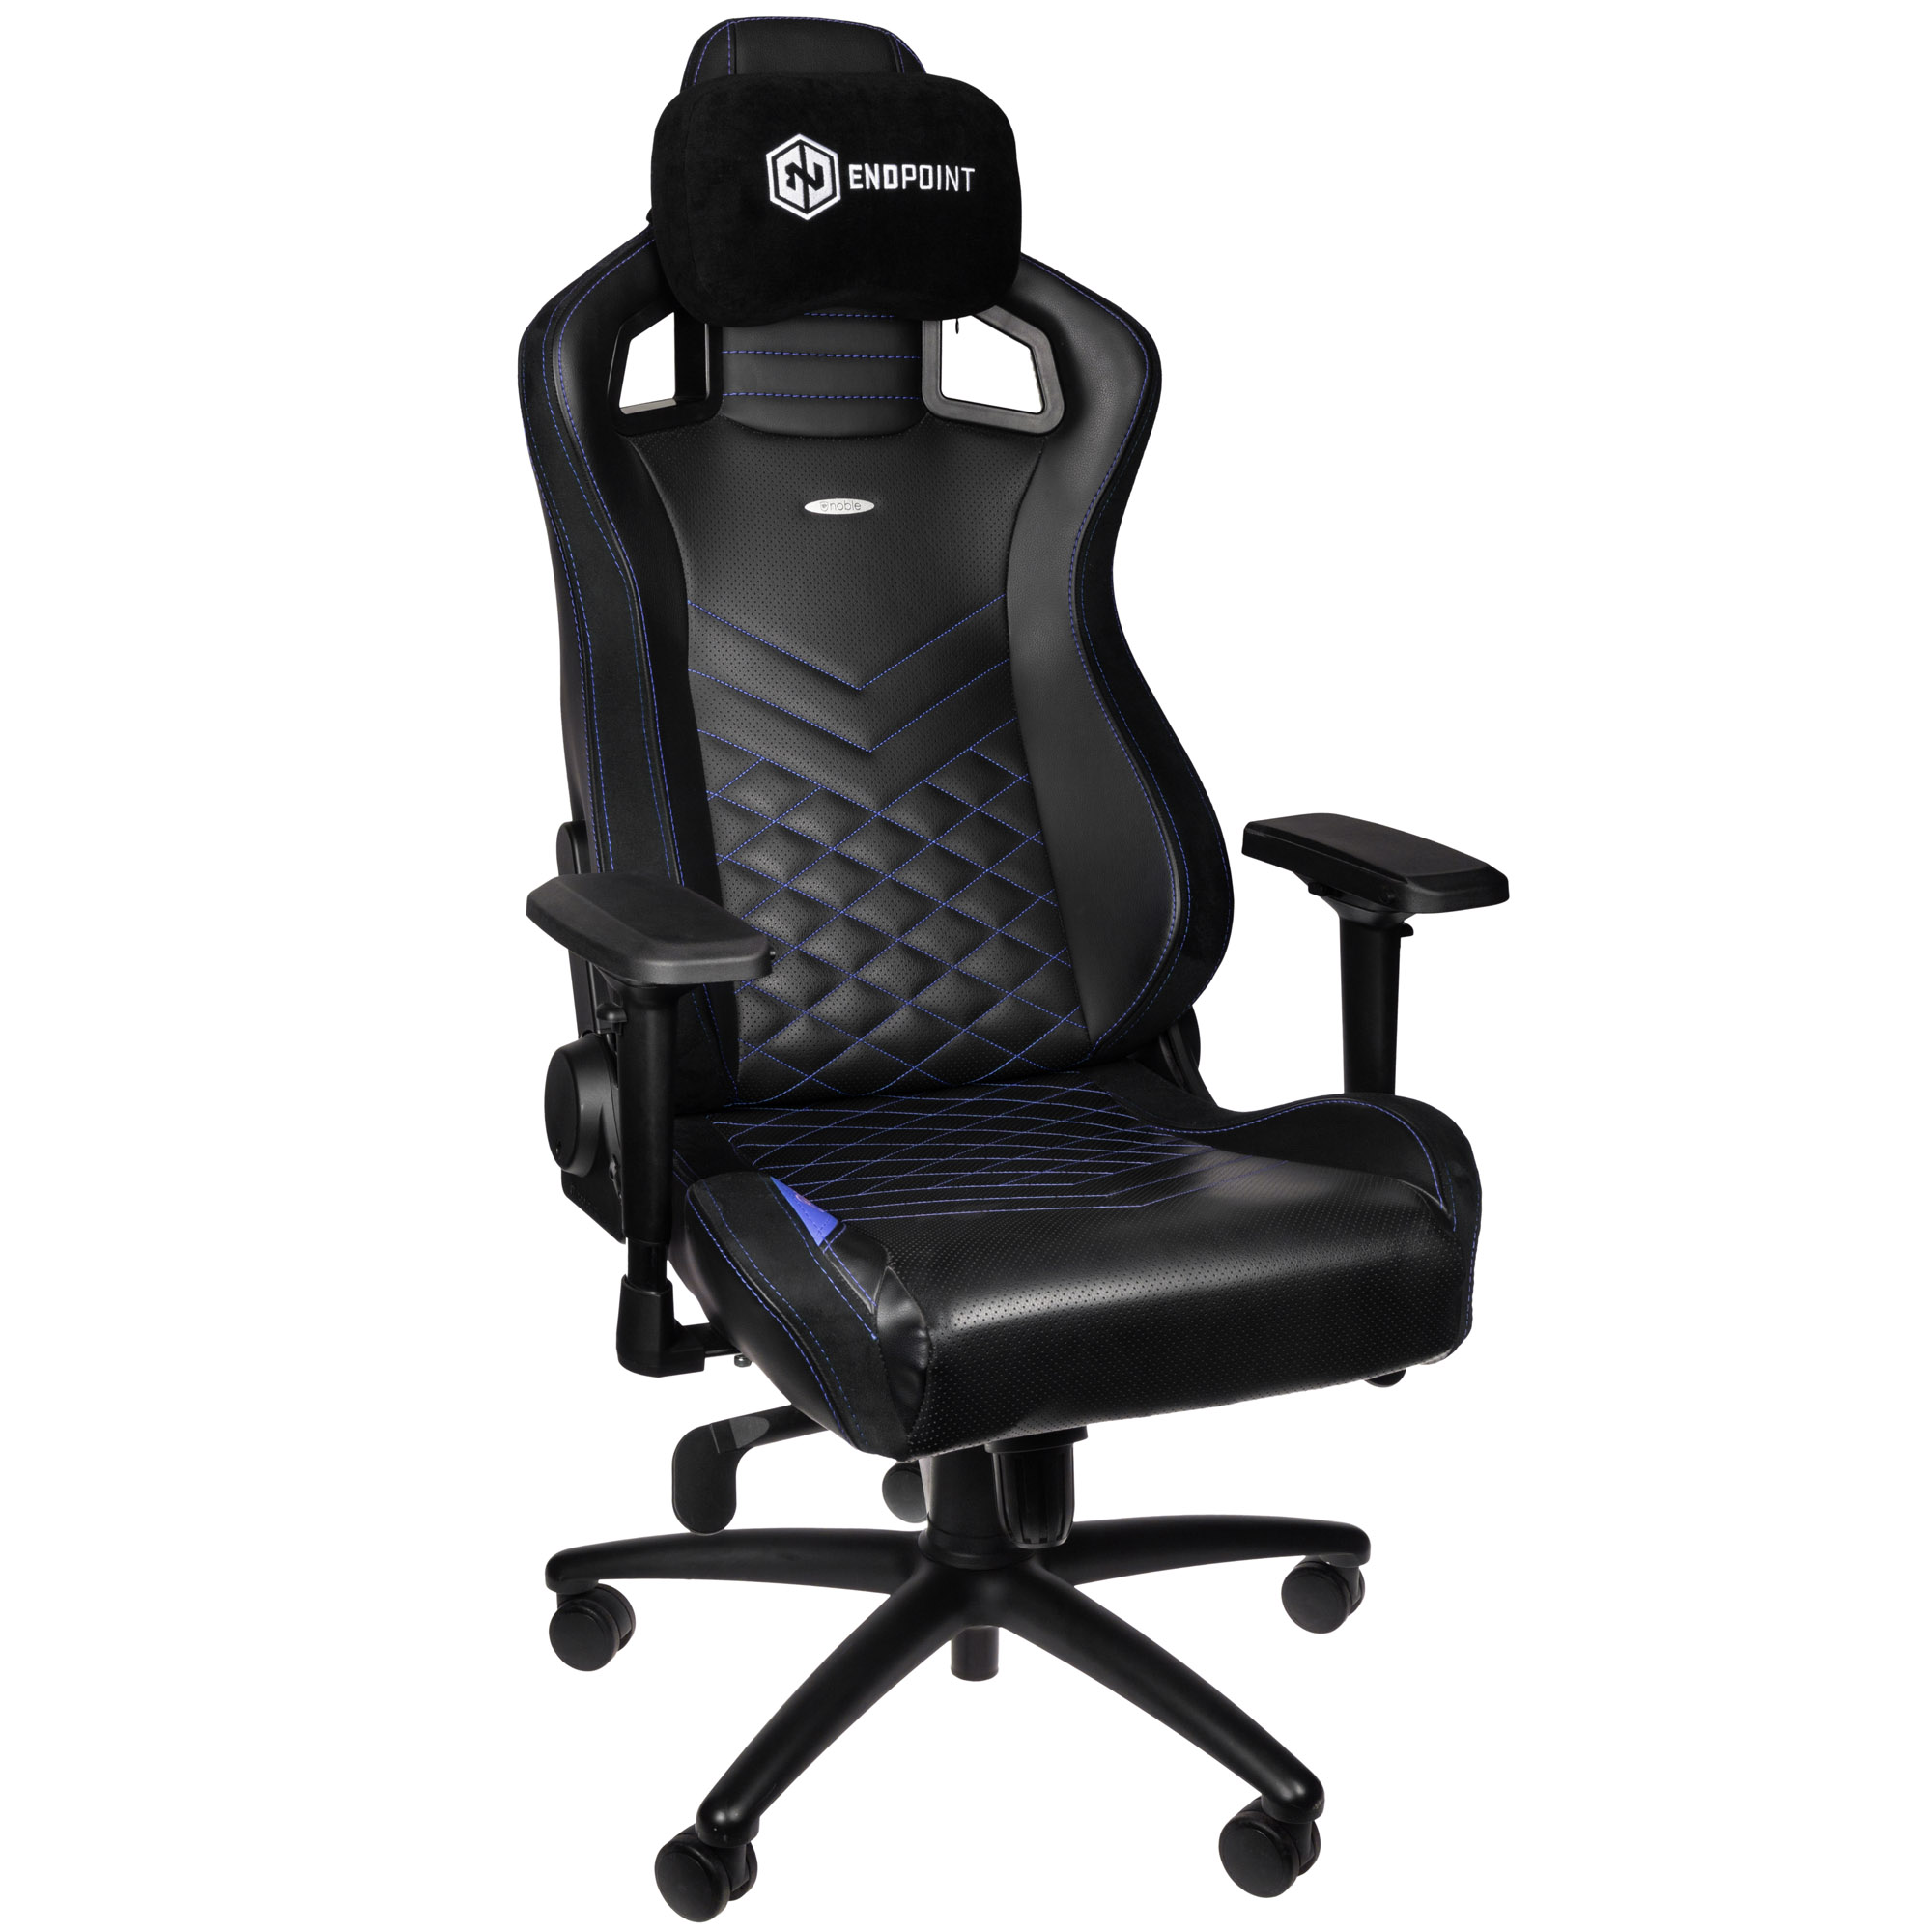 noblechairs EPIC Gaming Chair – Endpoint Edition